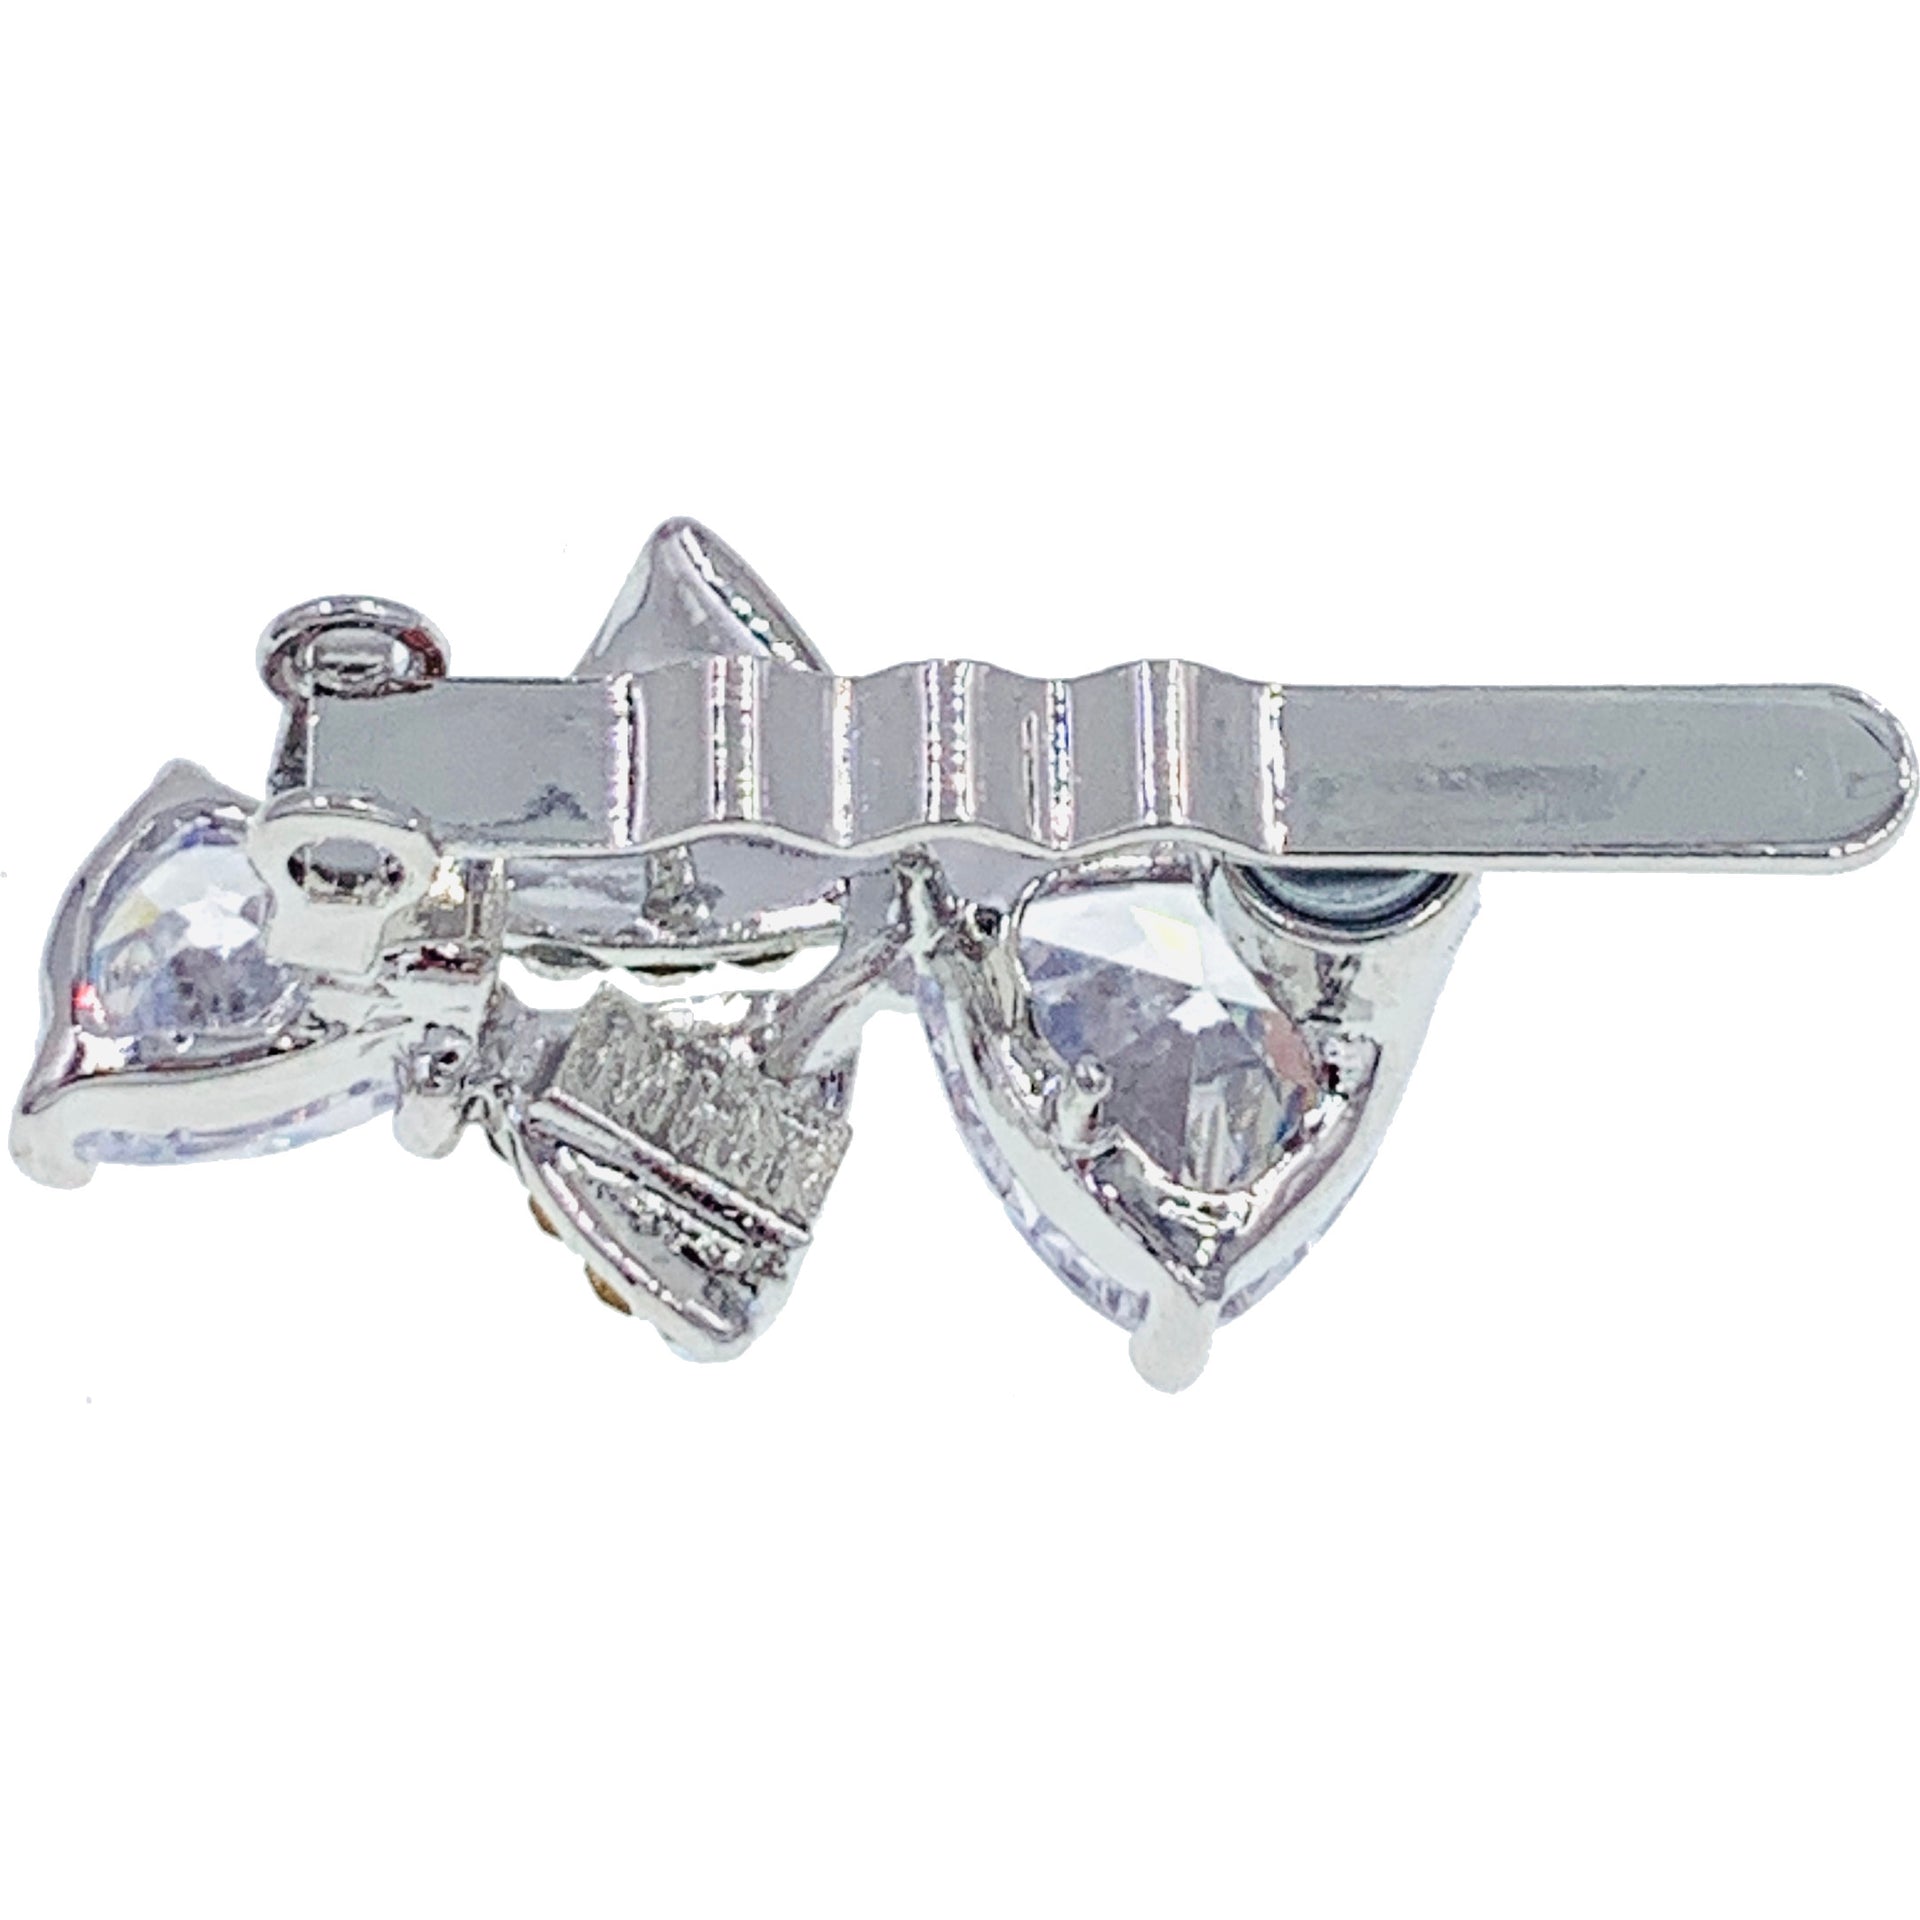 Dale BOW Magnetic Hair Clip Cubic Zirconia Crystals Hairpin Barrette, Magnetic Clip - MOGHANT